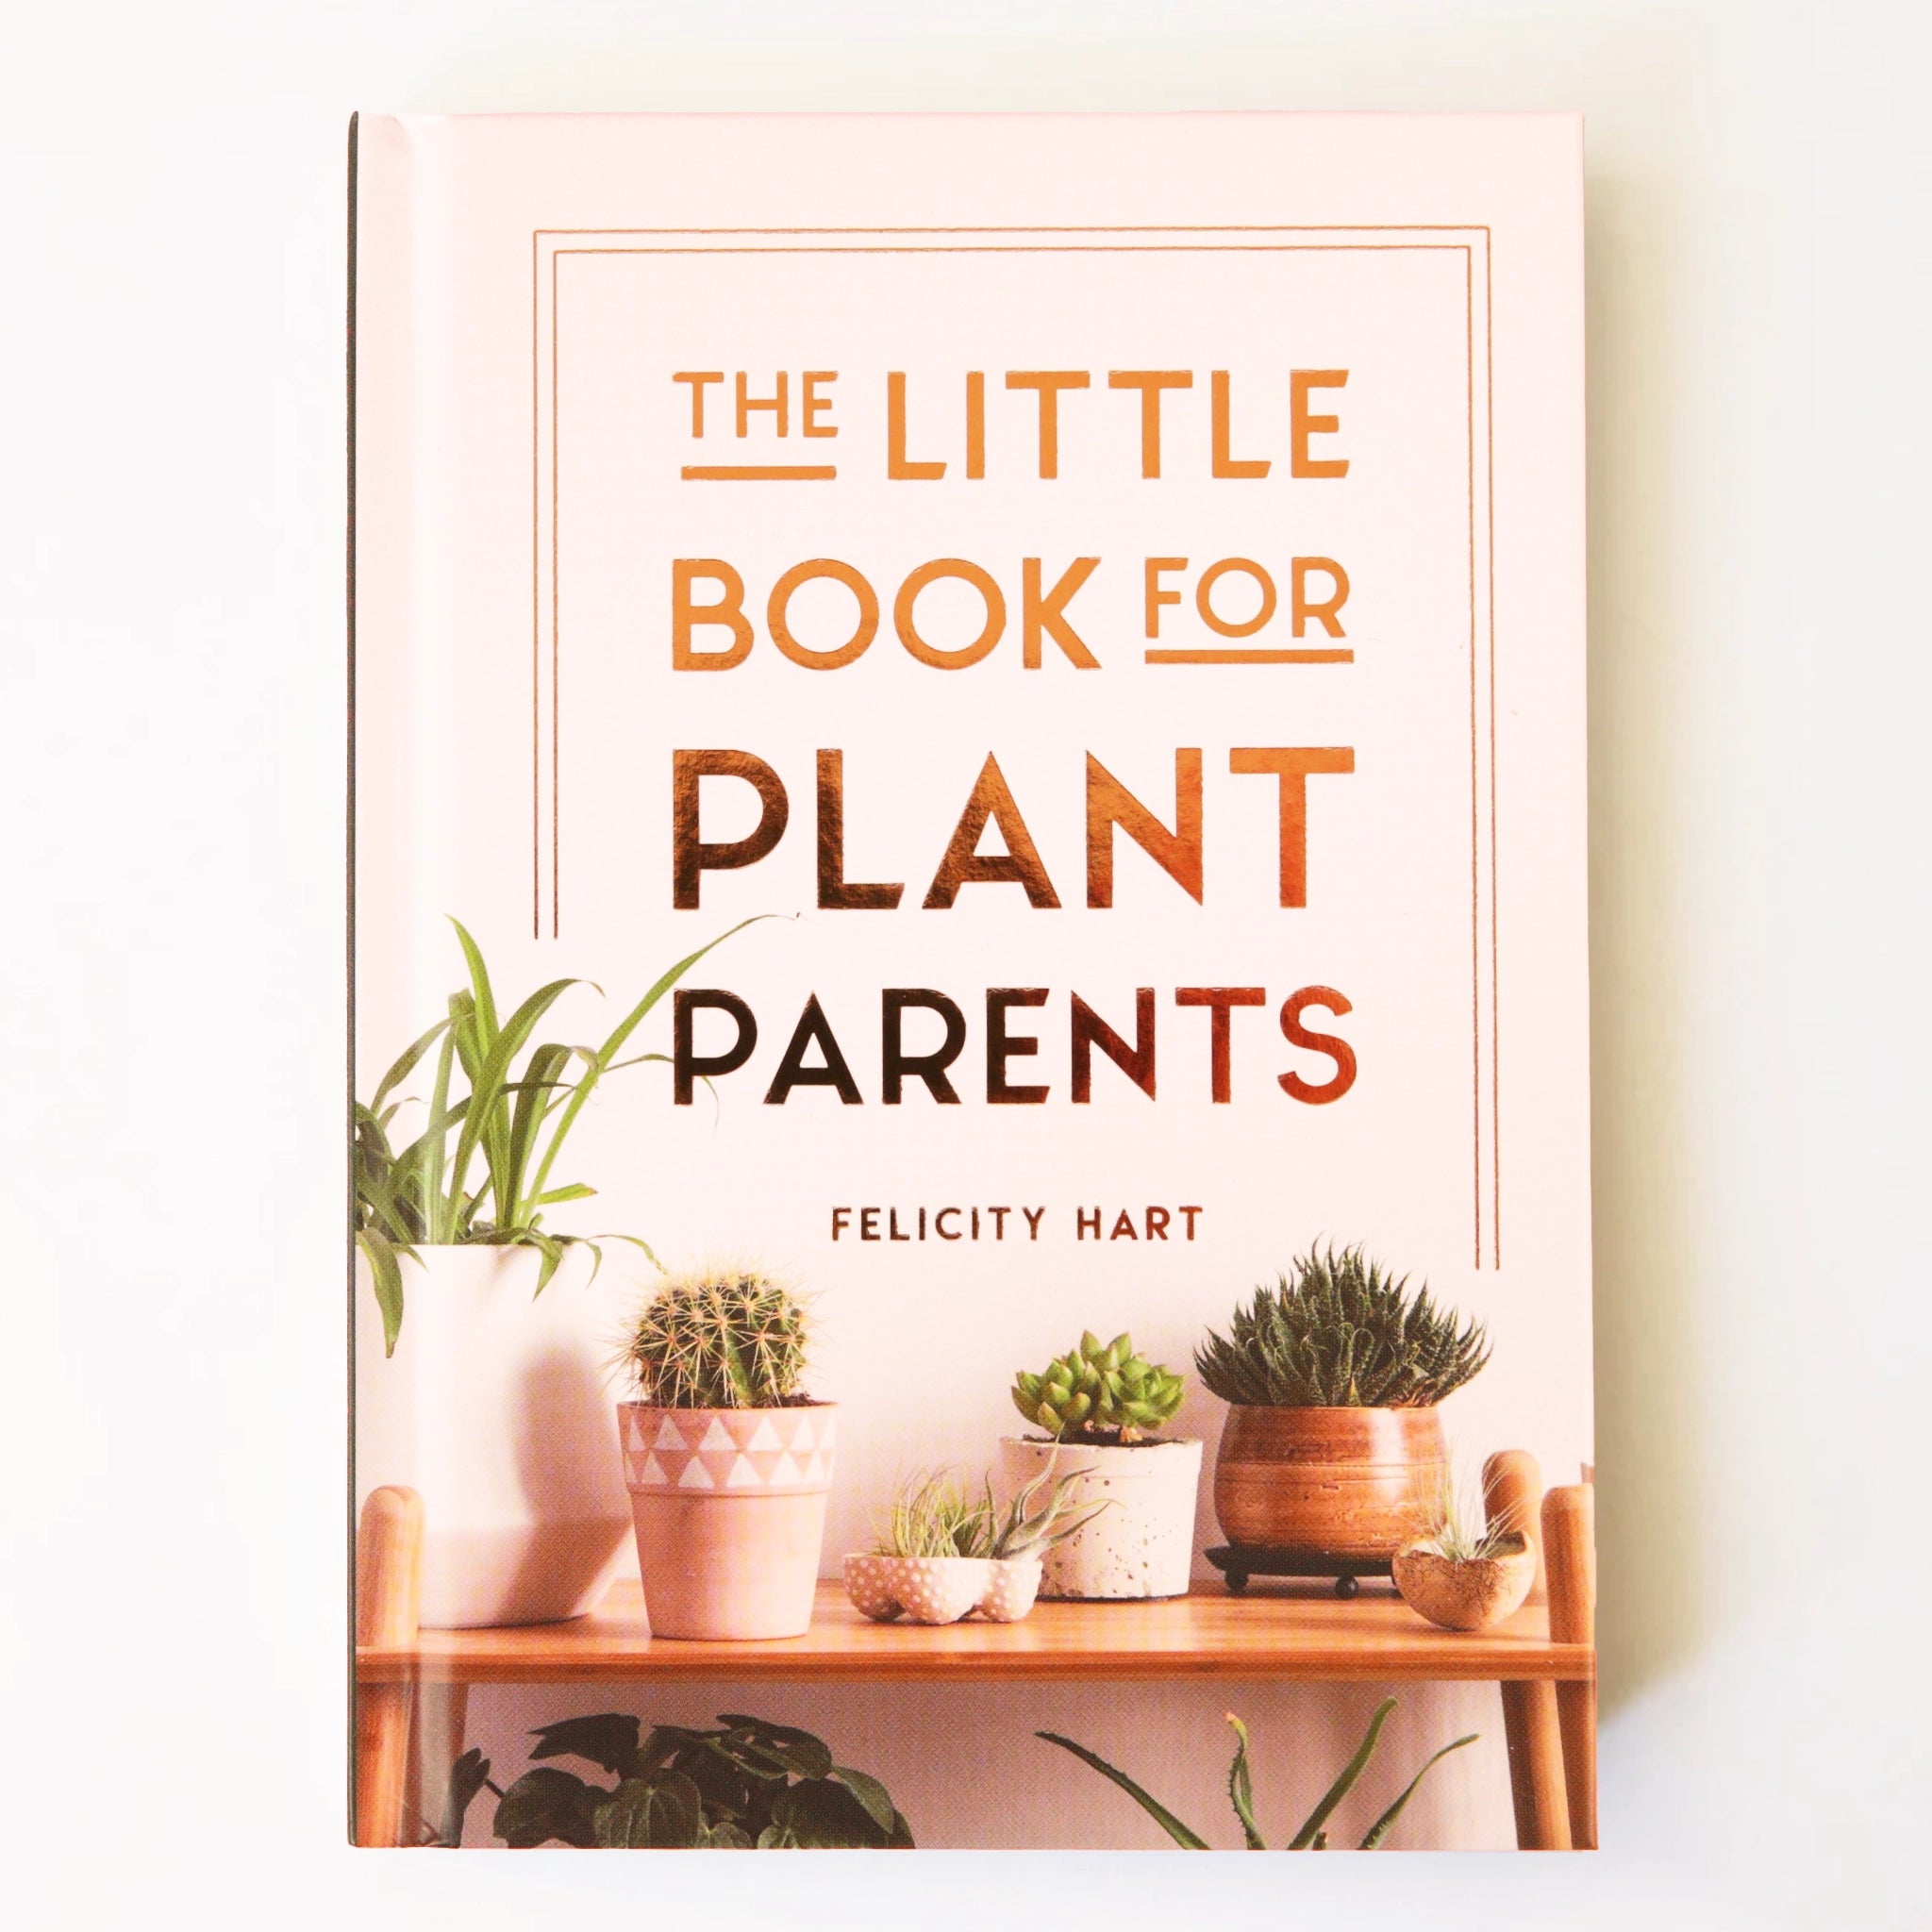 On a cream background is a light tan/pink book cover with rose gold text that reads, "The Little Book For Plant Parents by Felicity Hart" as well as a photograph of different house plants and cacti sitting on a shelf.